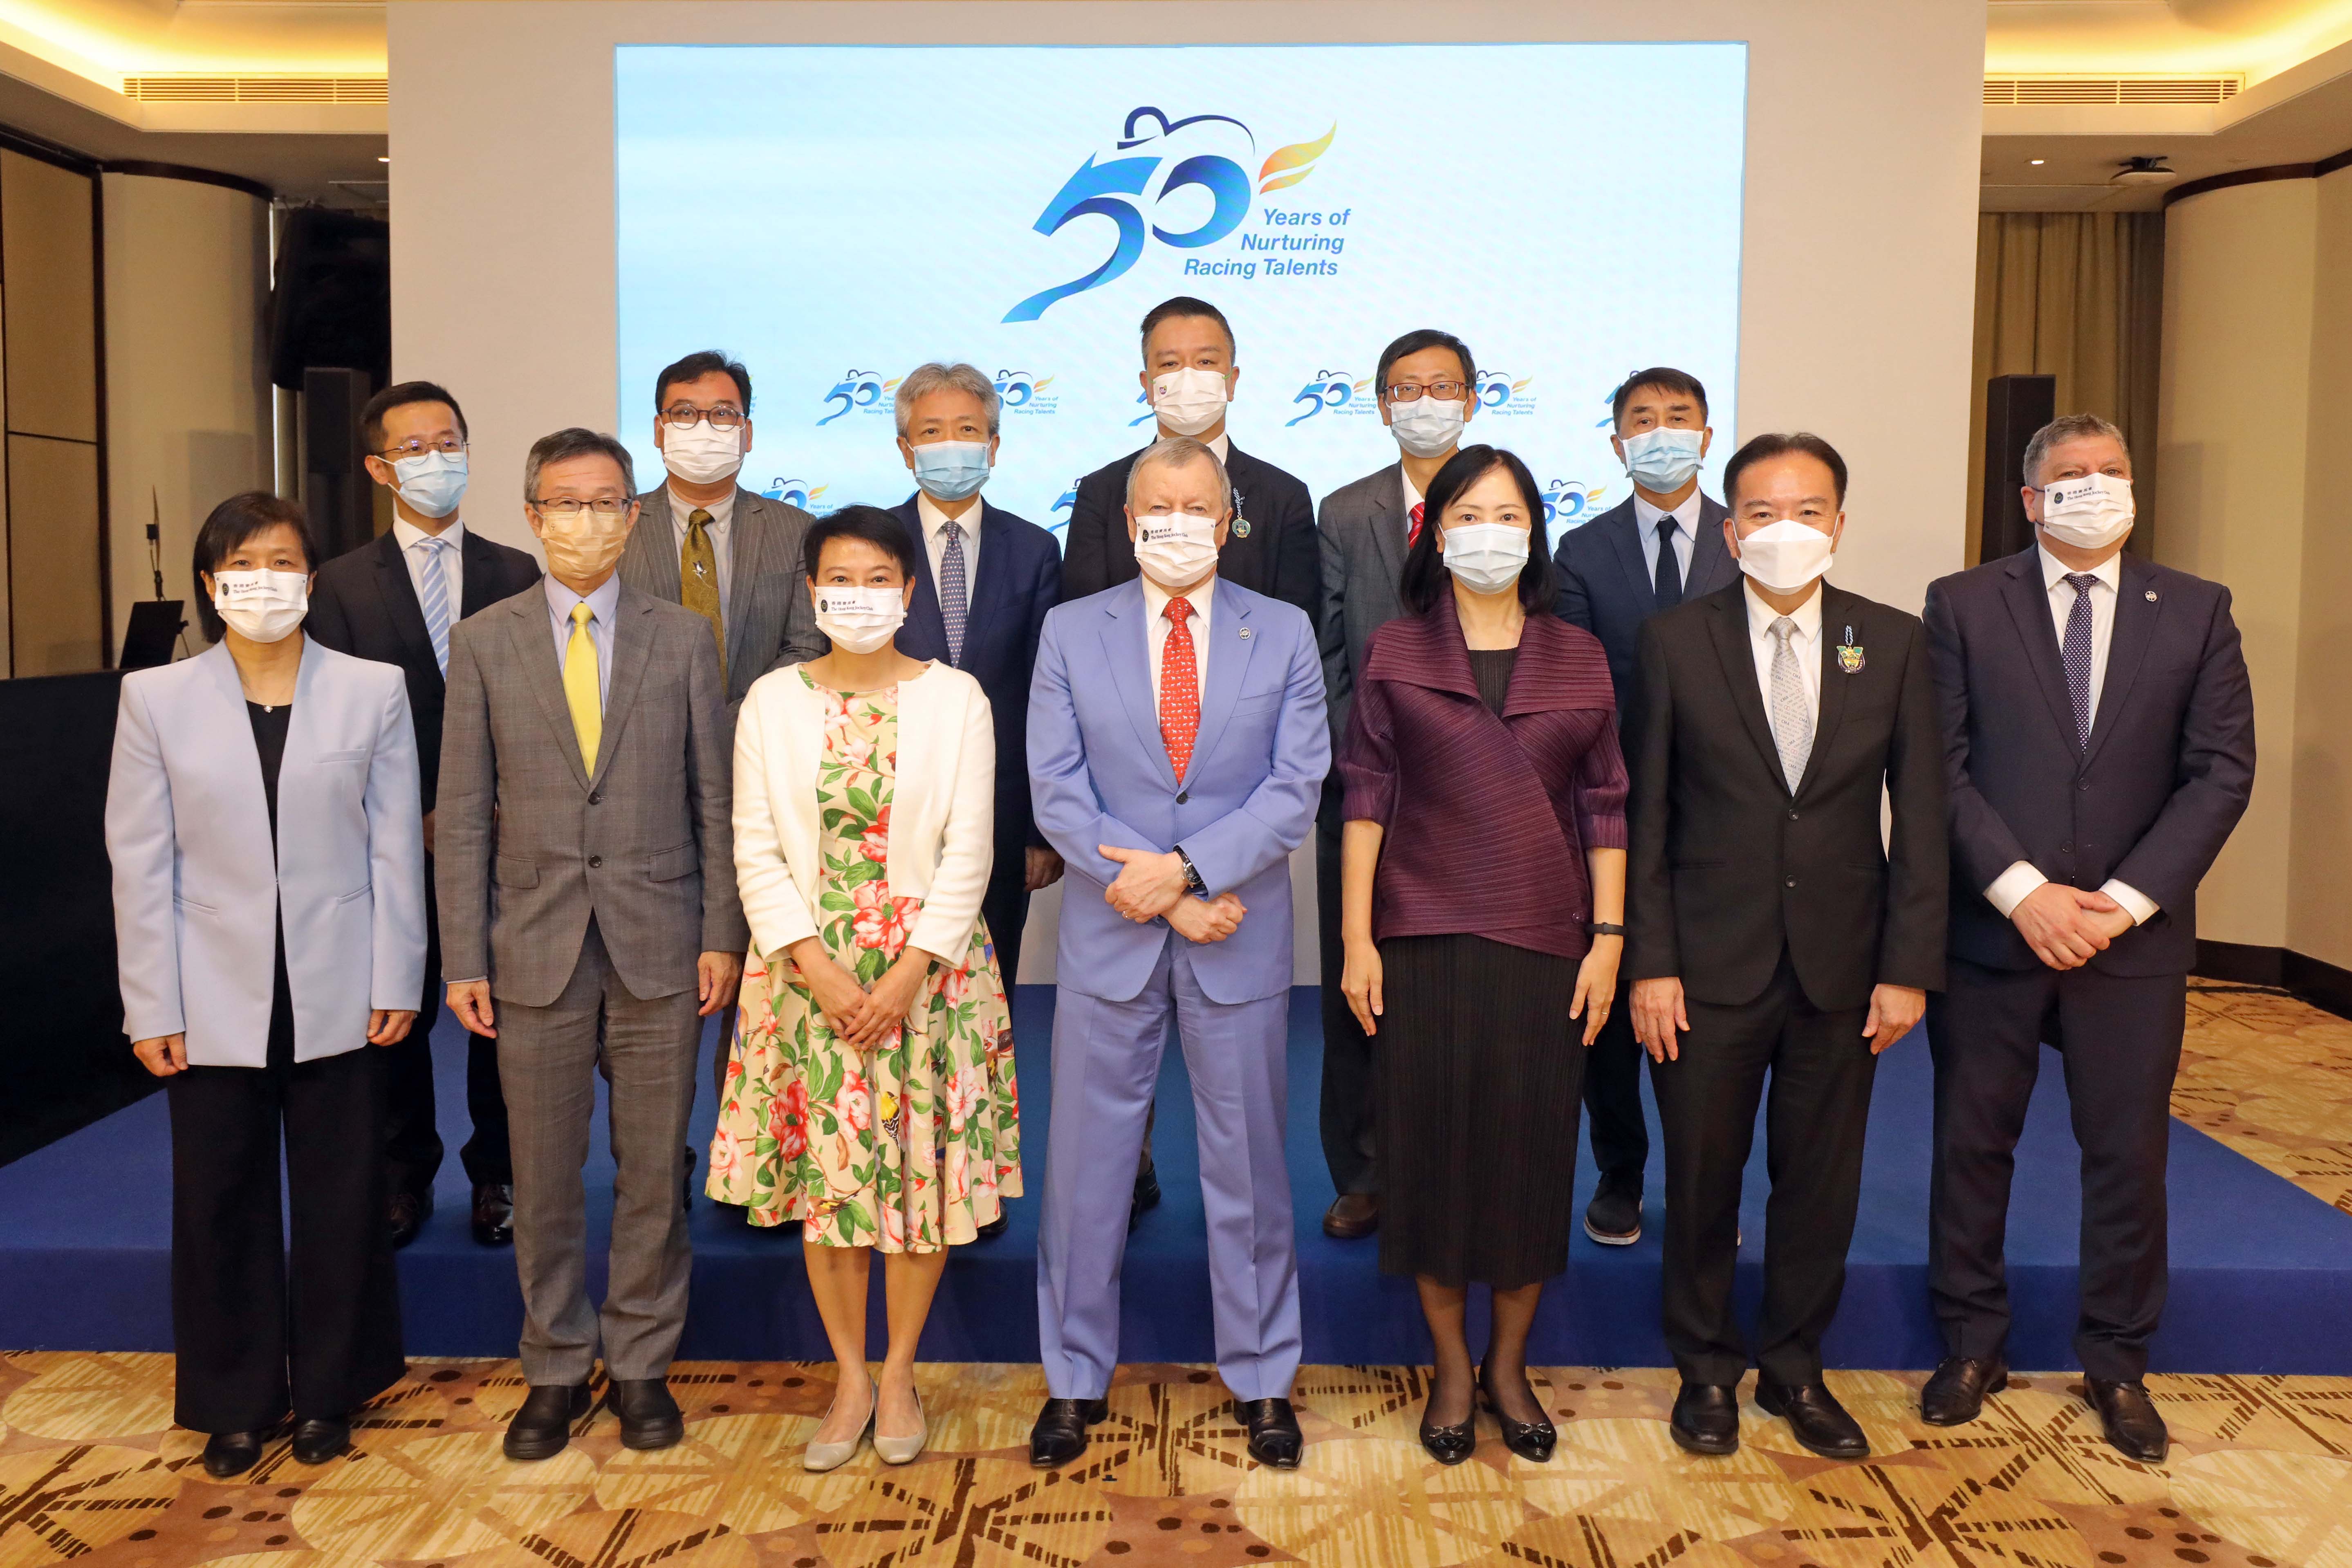 EdUHK Council Chairman Dr David Wong Yau-kar (front row: second from right); President Professor Stephen Cheung (second row: third from left); Professor John Lee (second row: second from right); and Dr Andy Tse pictured with Permanent Secretary for Education of HKSAR Government Ms Michelle Li (front row: third from right) and the HKJC senior management 